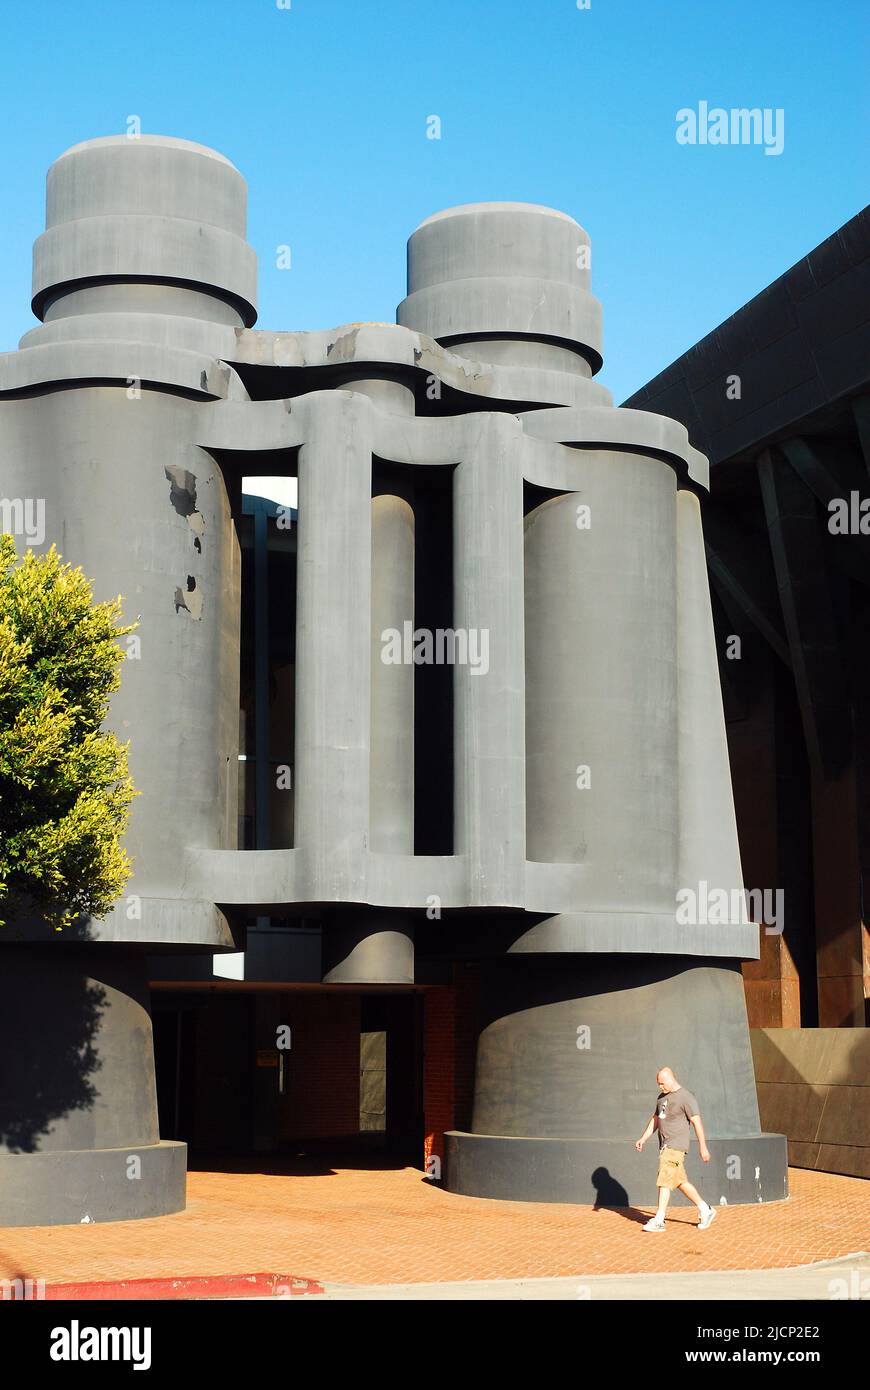 A large set of binoculars stands outside of the Chiat Day Building, designed by noted archit3ect Frank Gehry, in Venice Beach, near Los Angeles Stock Photo